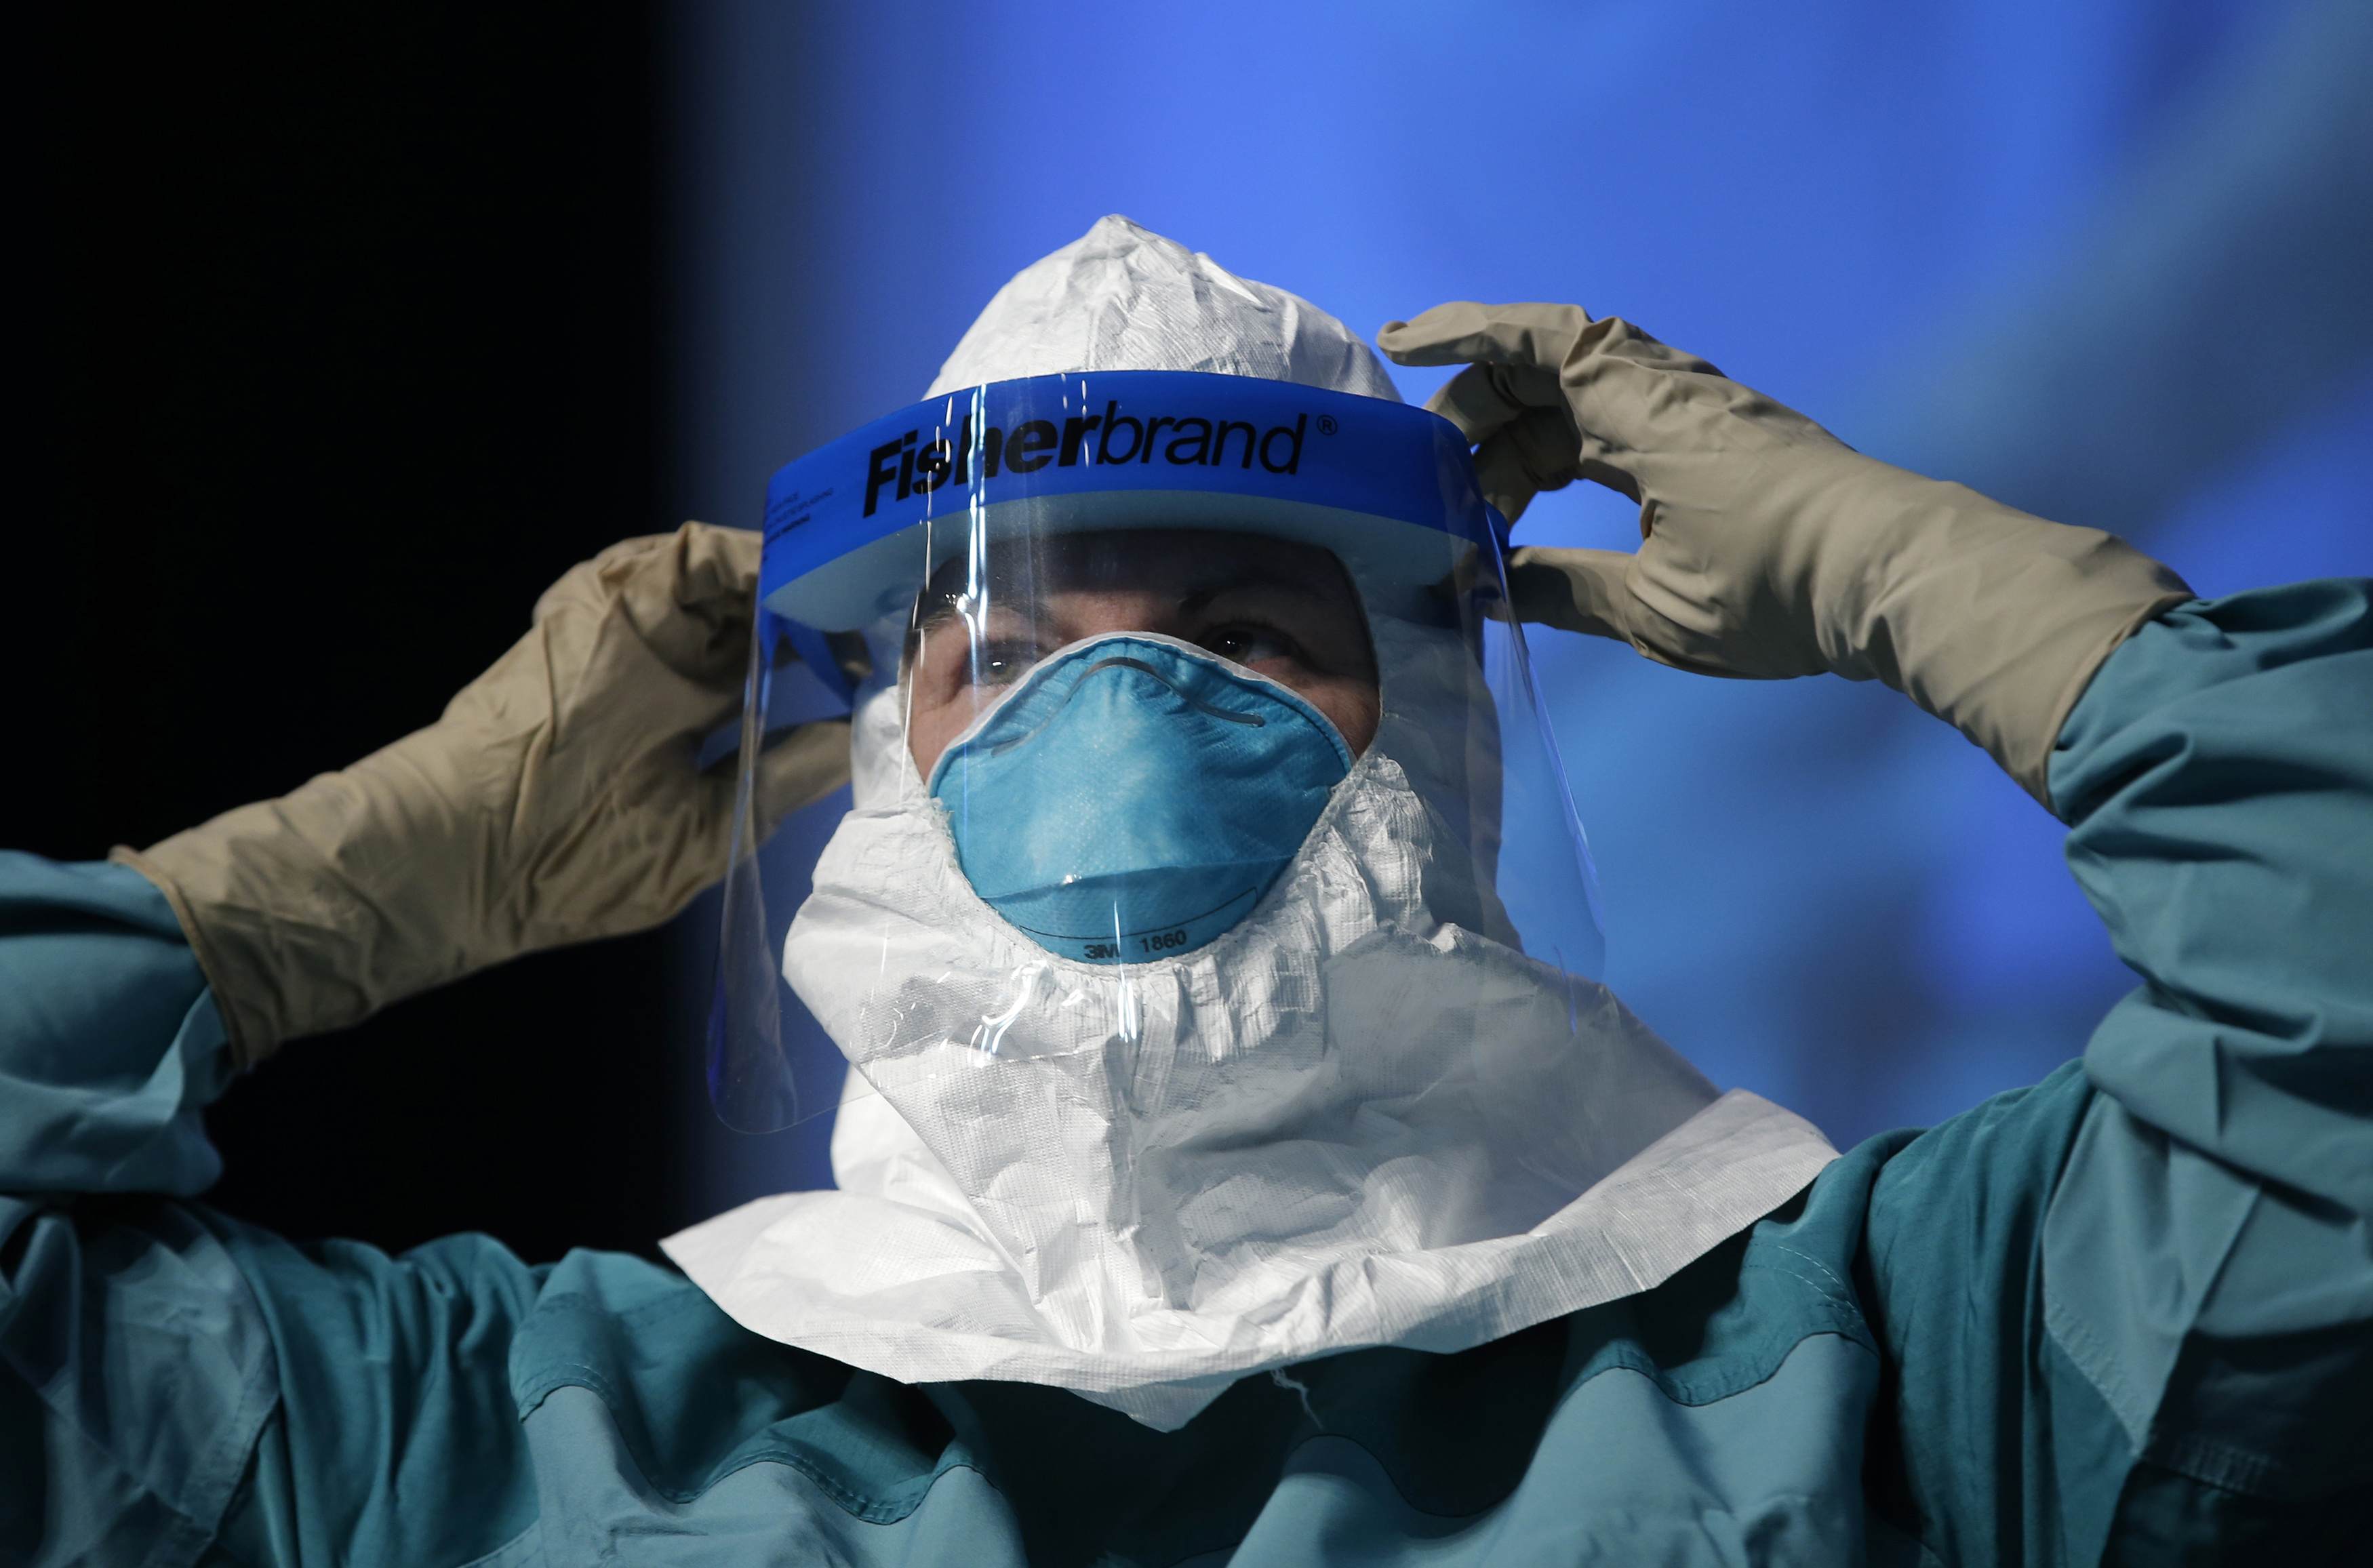 A nurse in a New York hospital demonstrates putting on protective equipment during an Ebola education session. Photo: Reuters